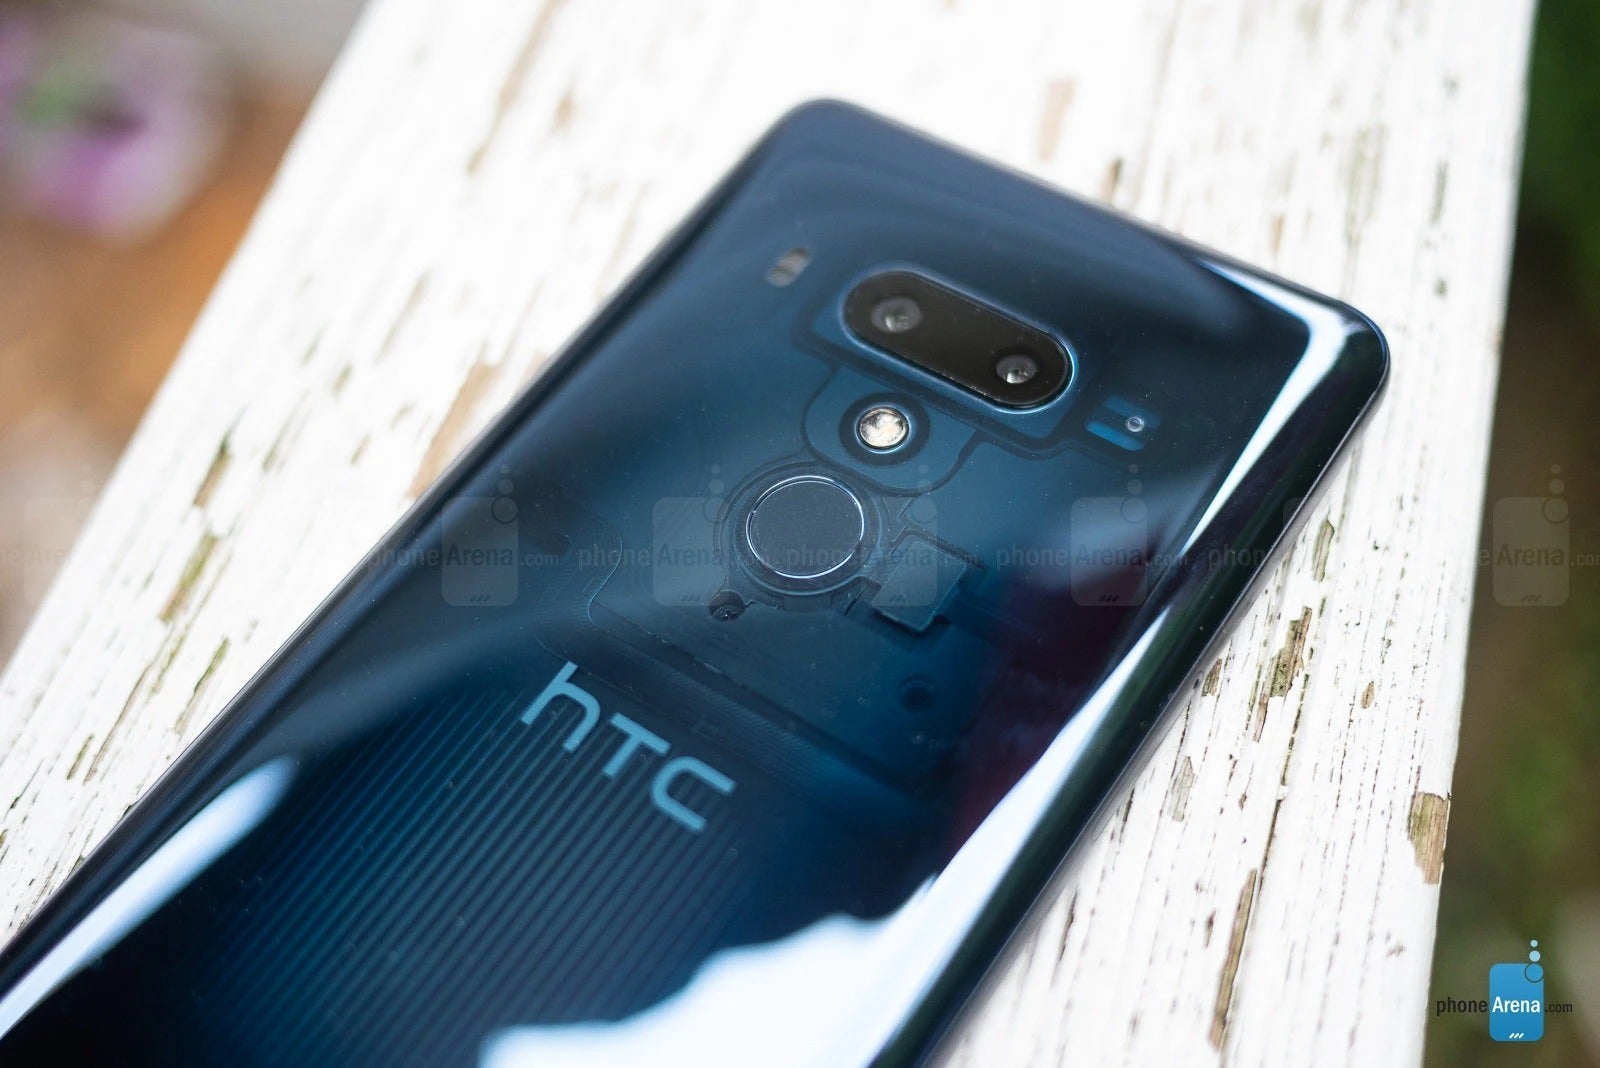 HTC U12 Plus from 2018 - Legendary HTC prepping to launch a new premium phone?